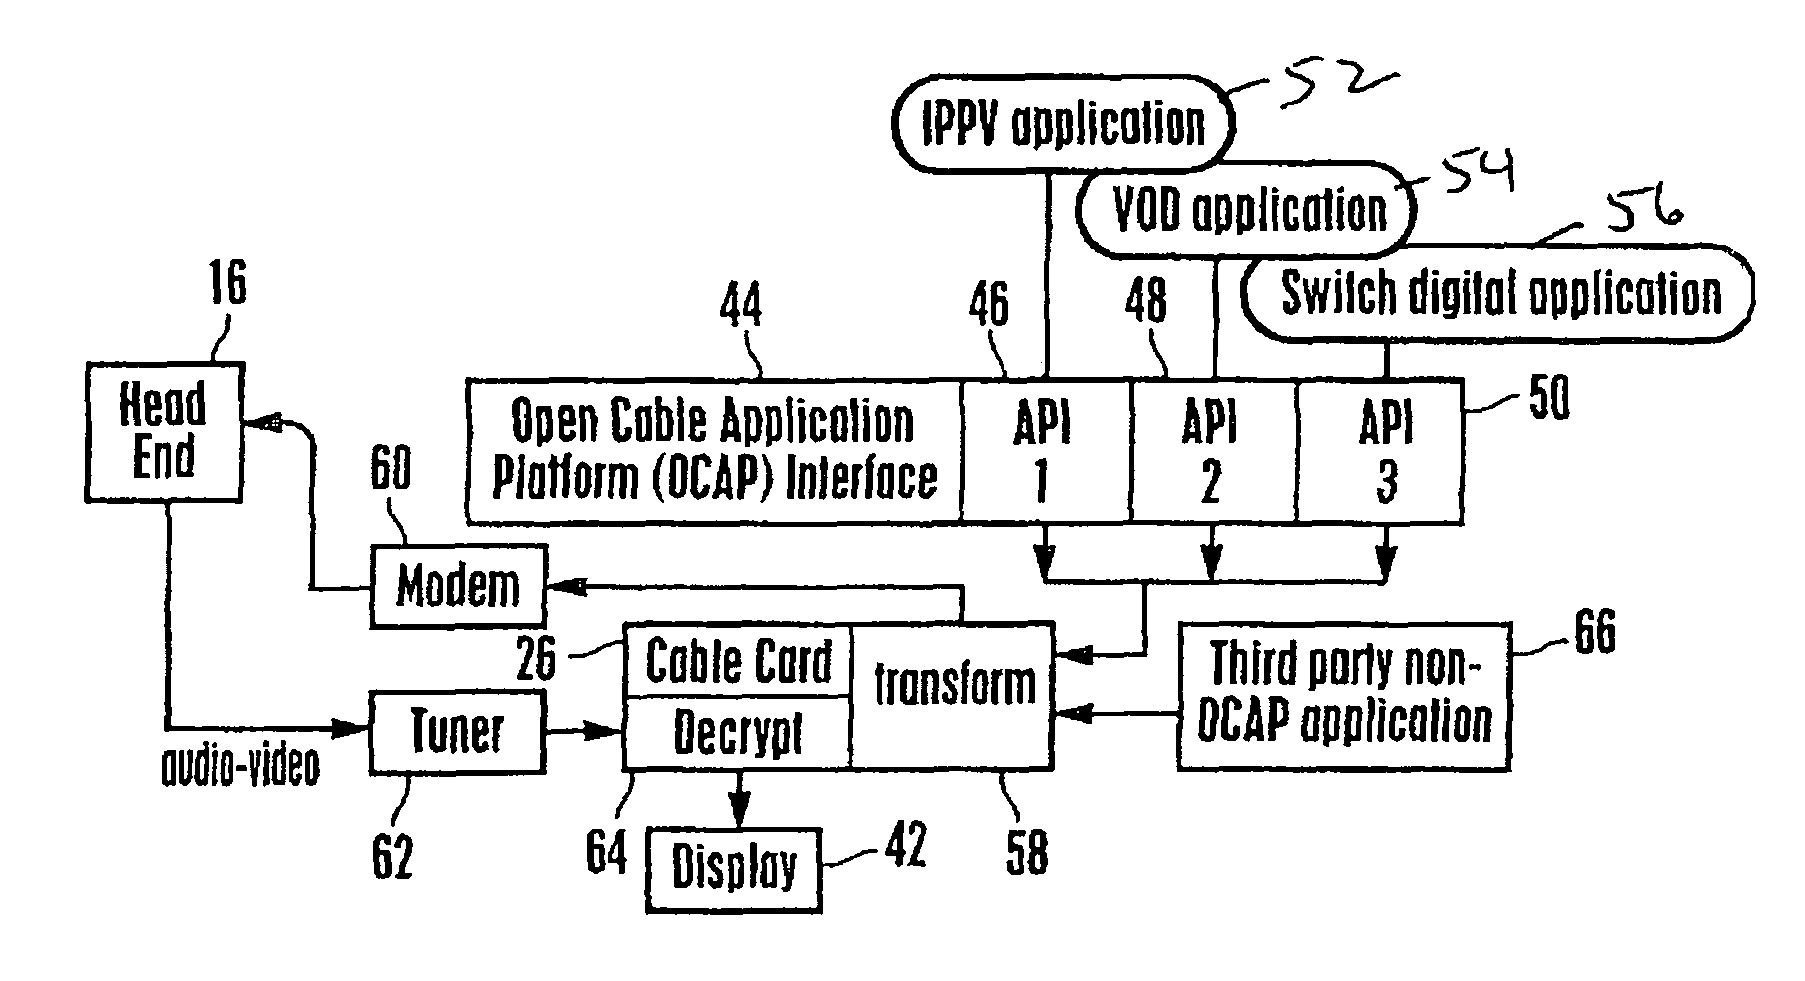 TV receiver using cable card for abstracting open cable application platform (OCAP) messages to and from the head end